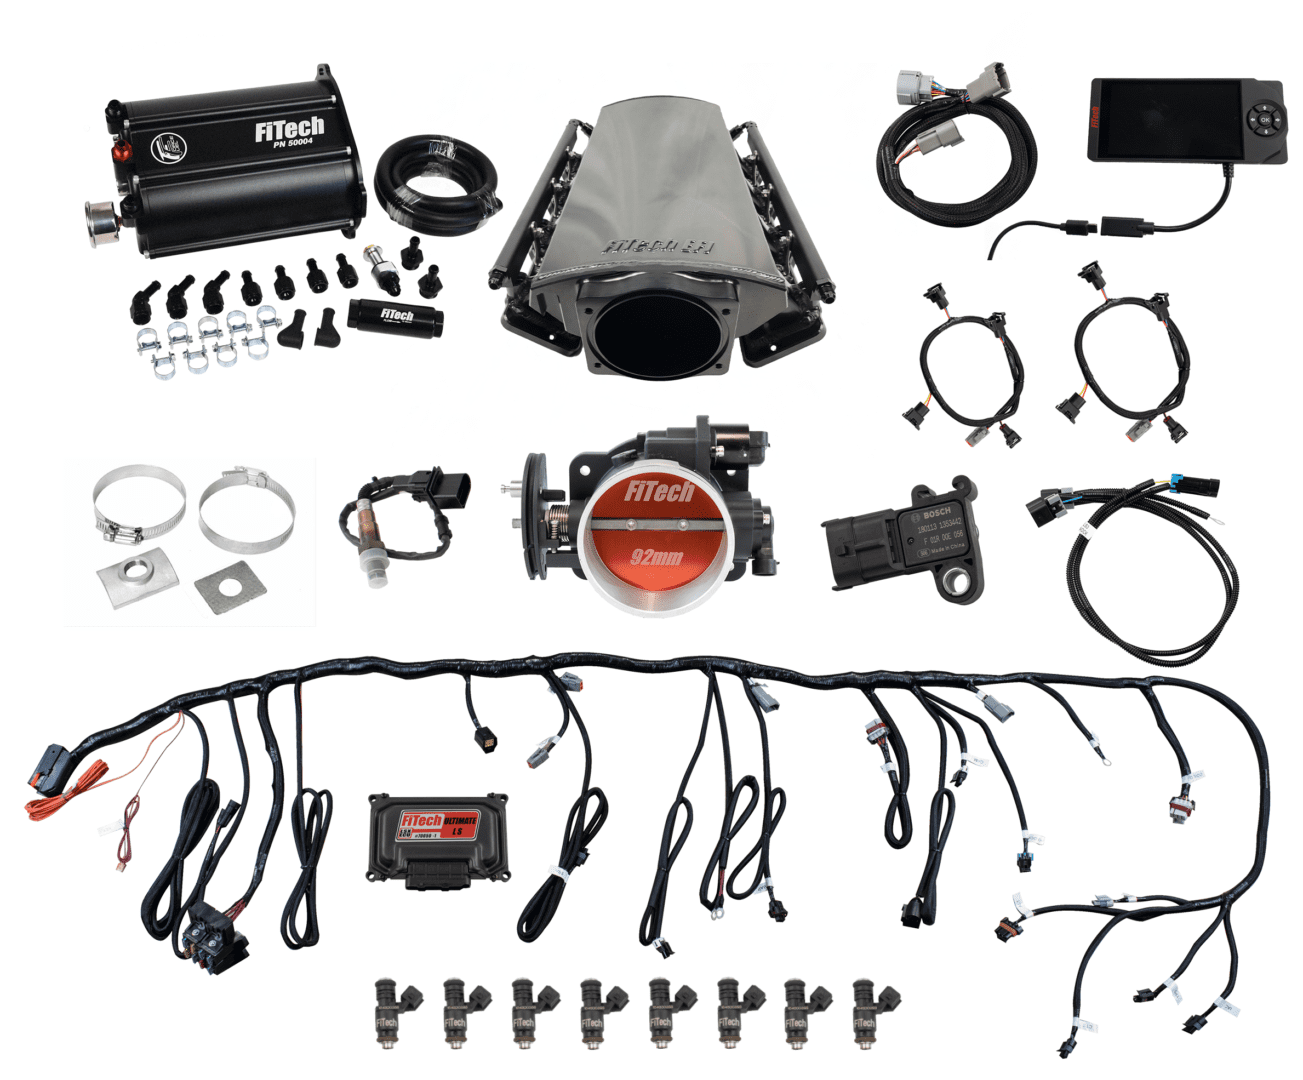 FiTech 75212 Fuel Delivery System, Ultimate LS Master Kit w/ 70012 Kit Plus Force Fuel